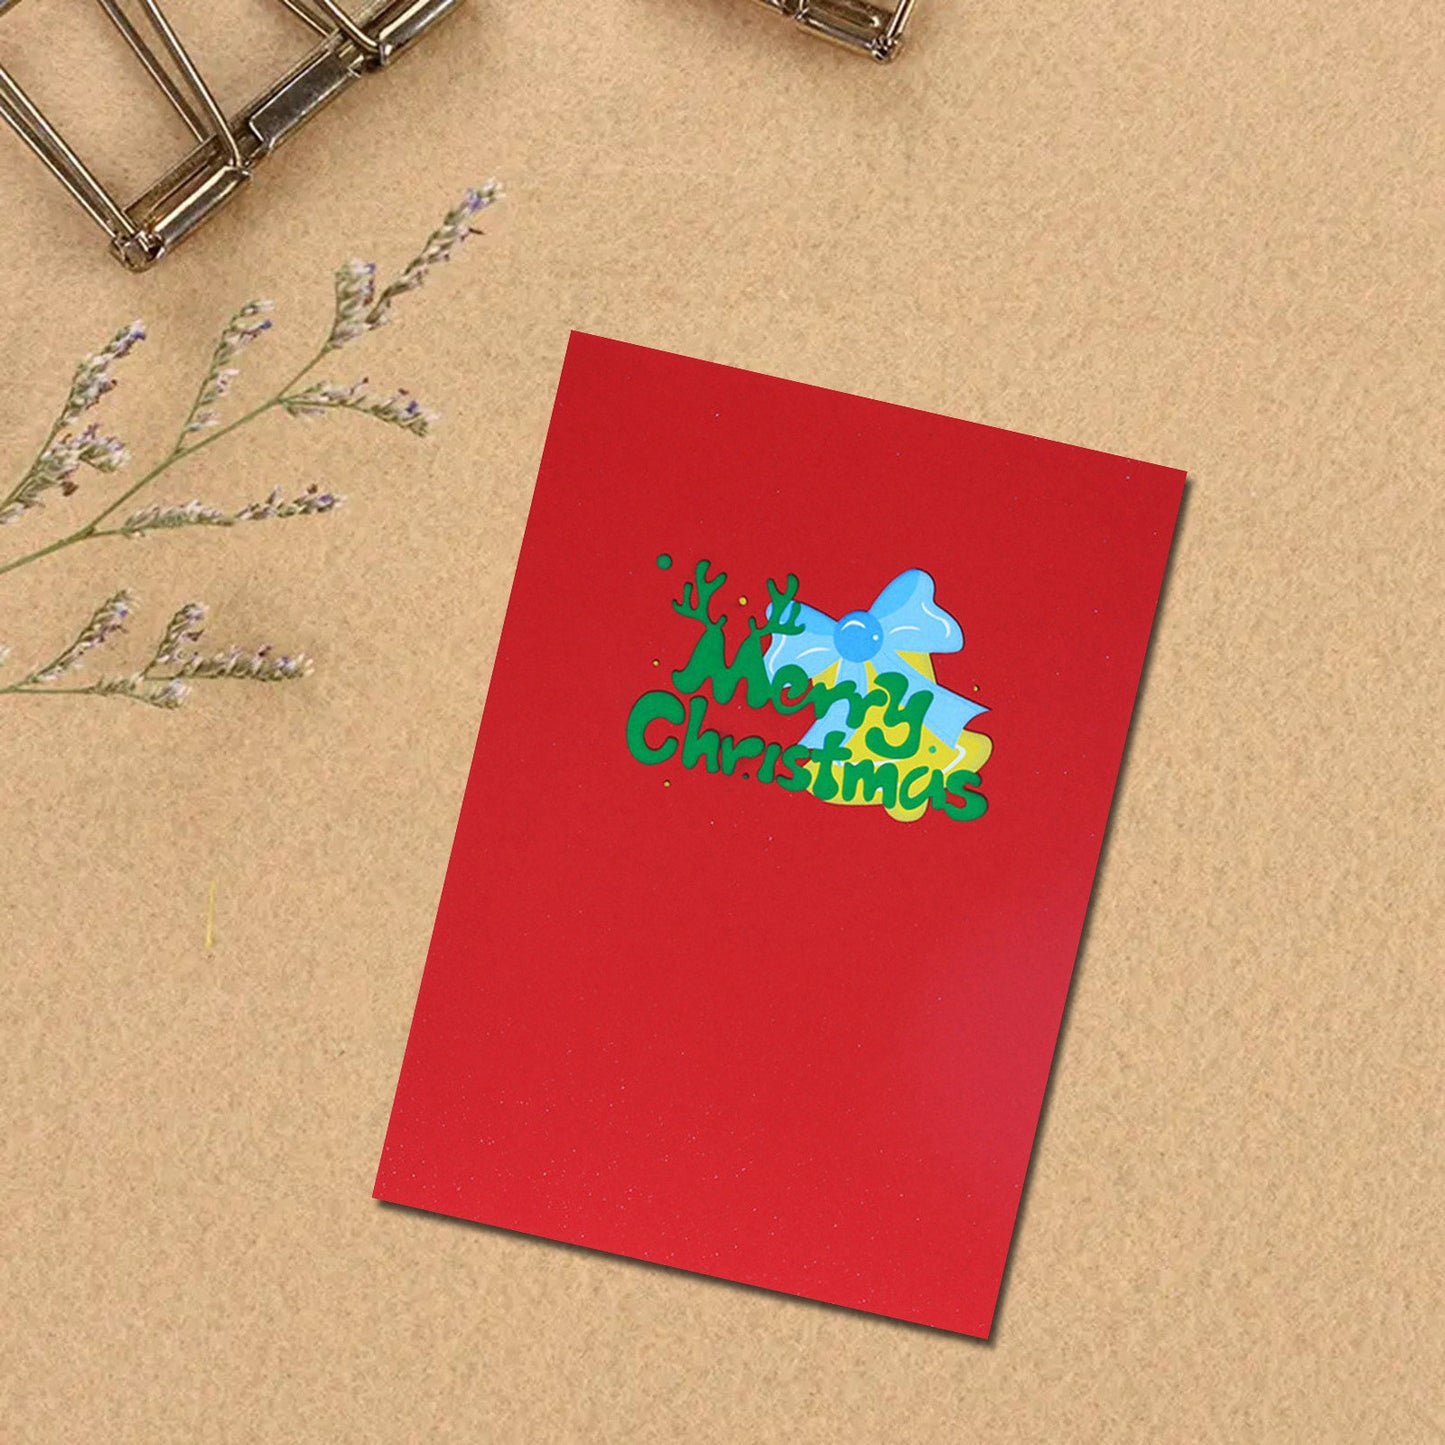 American Greetings Pop Up Christmas Card (Sharing Christmas With You)